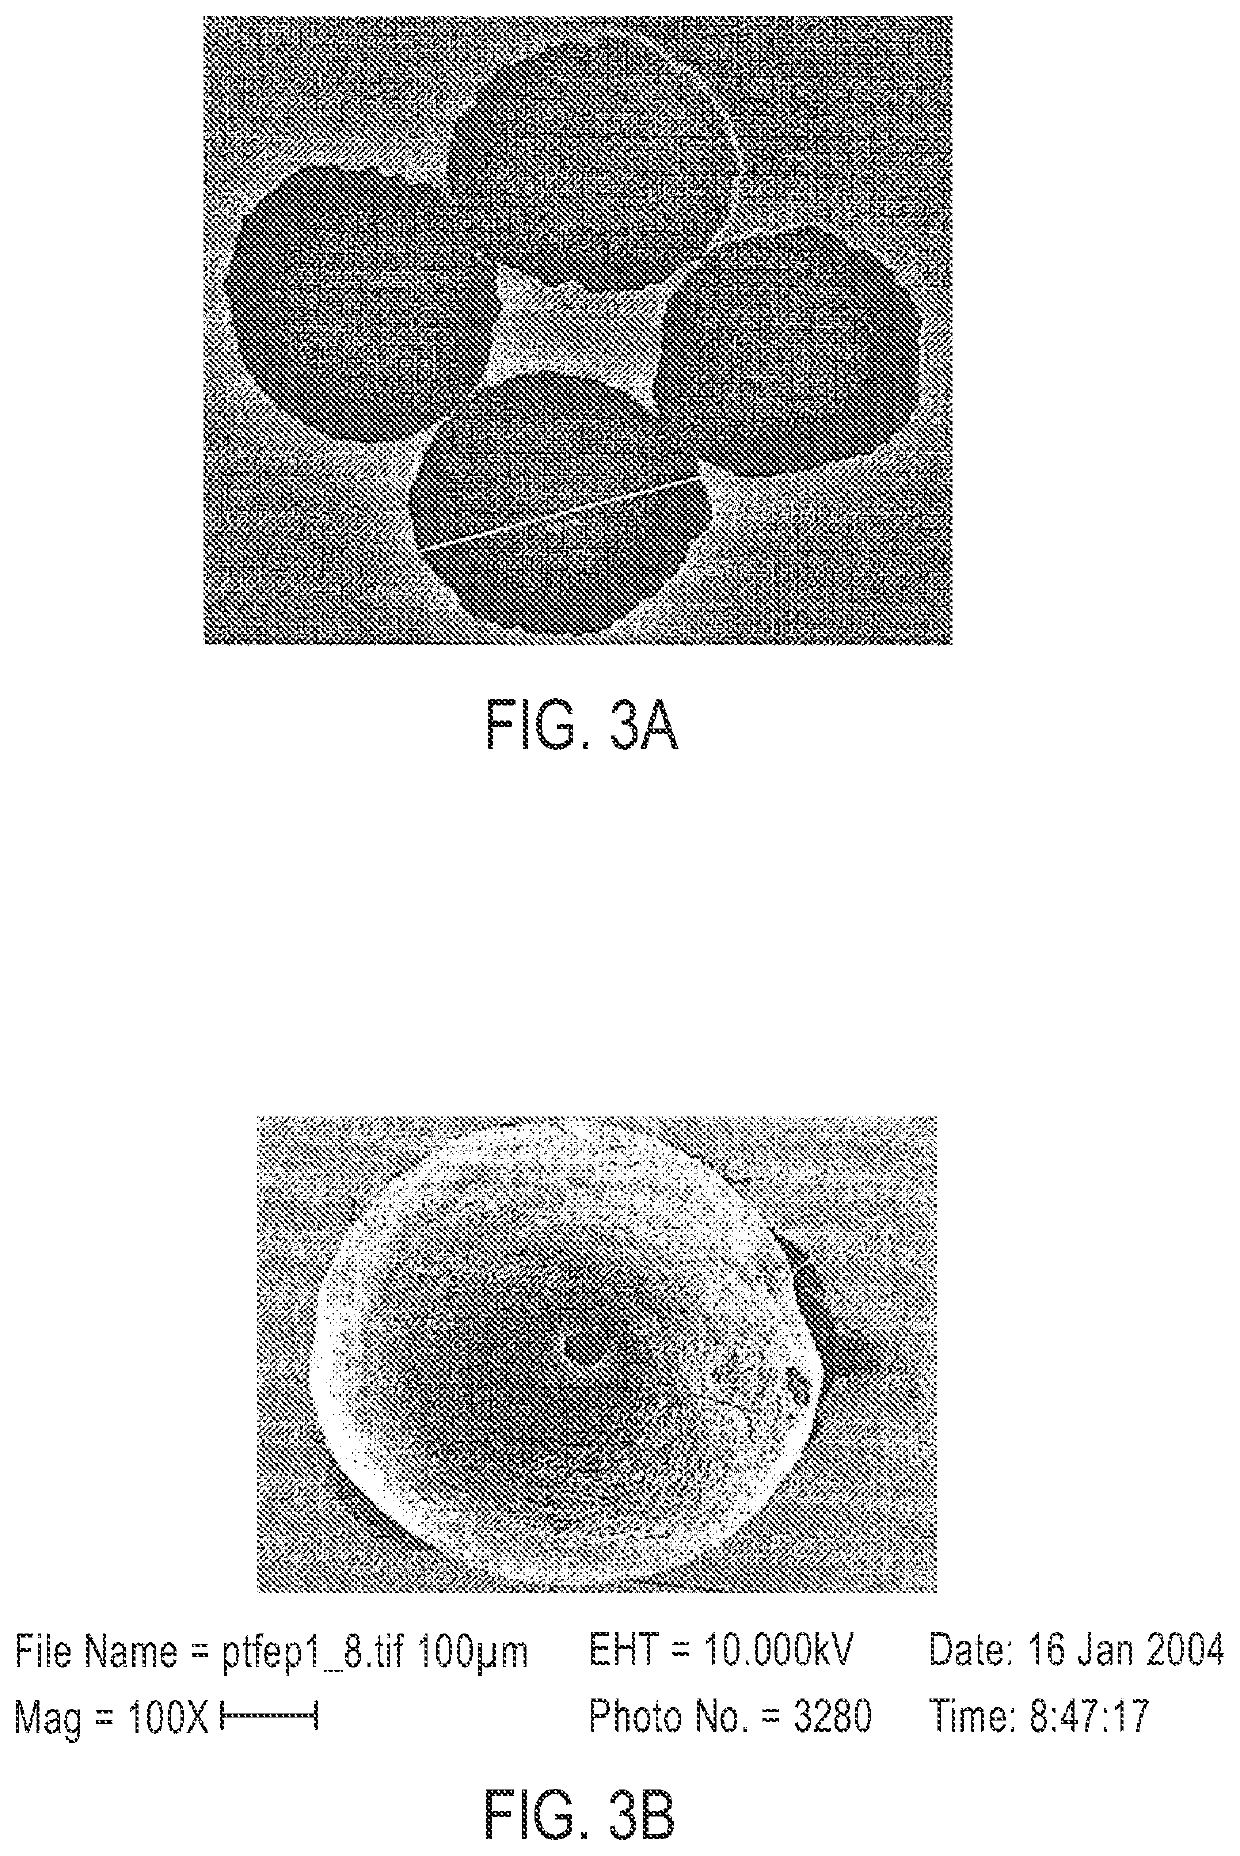 Color-coded and sized loadable polymeric particles for therapeutic and/or diagnostic applications and methods ofpreparing and using the same